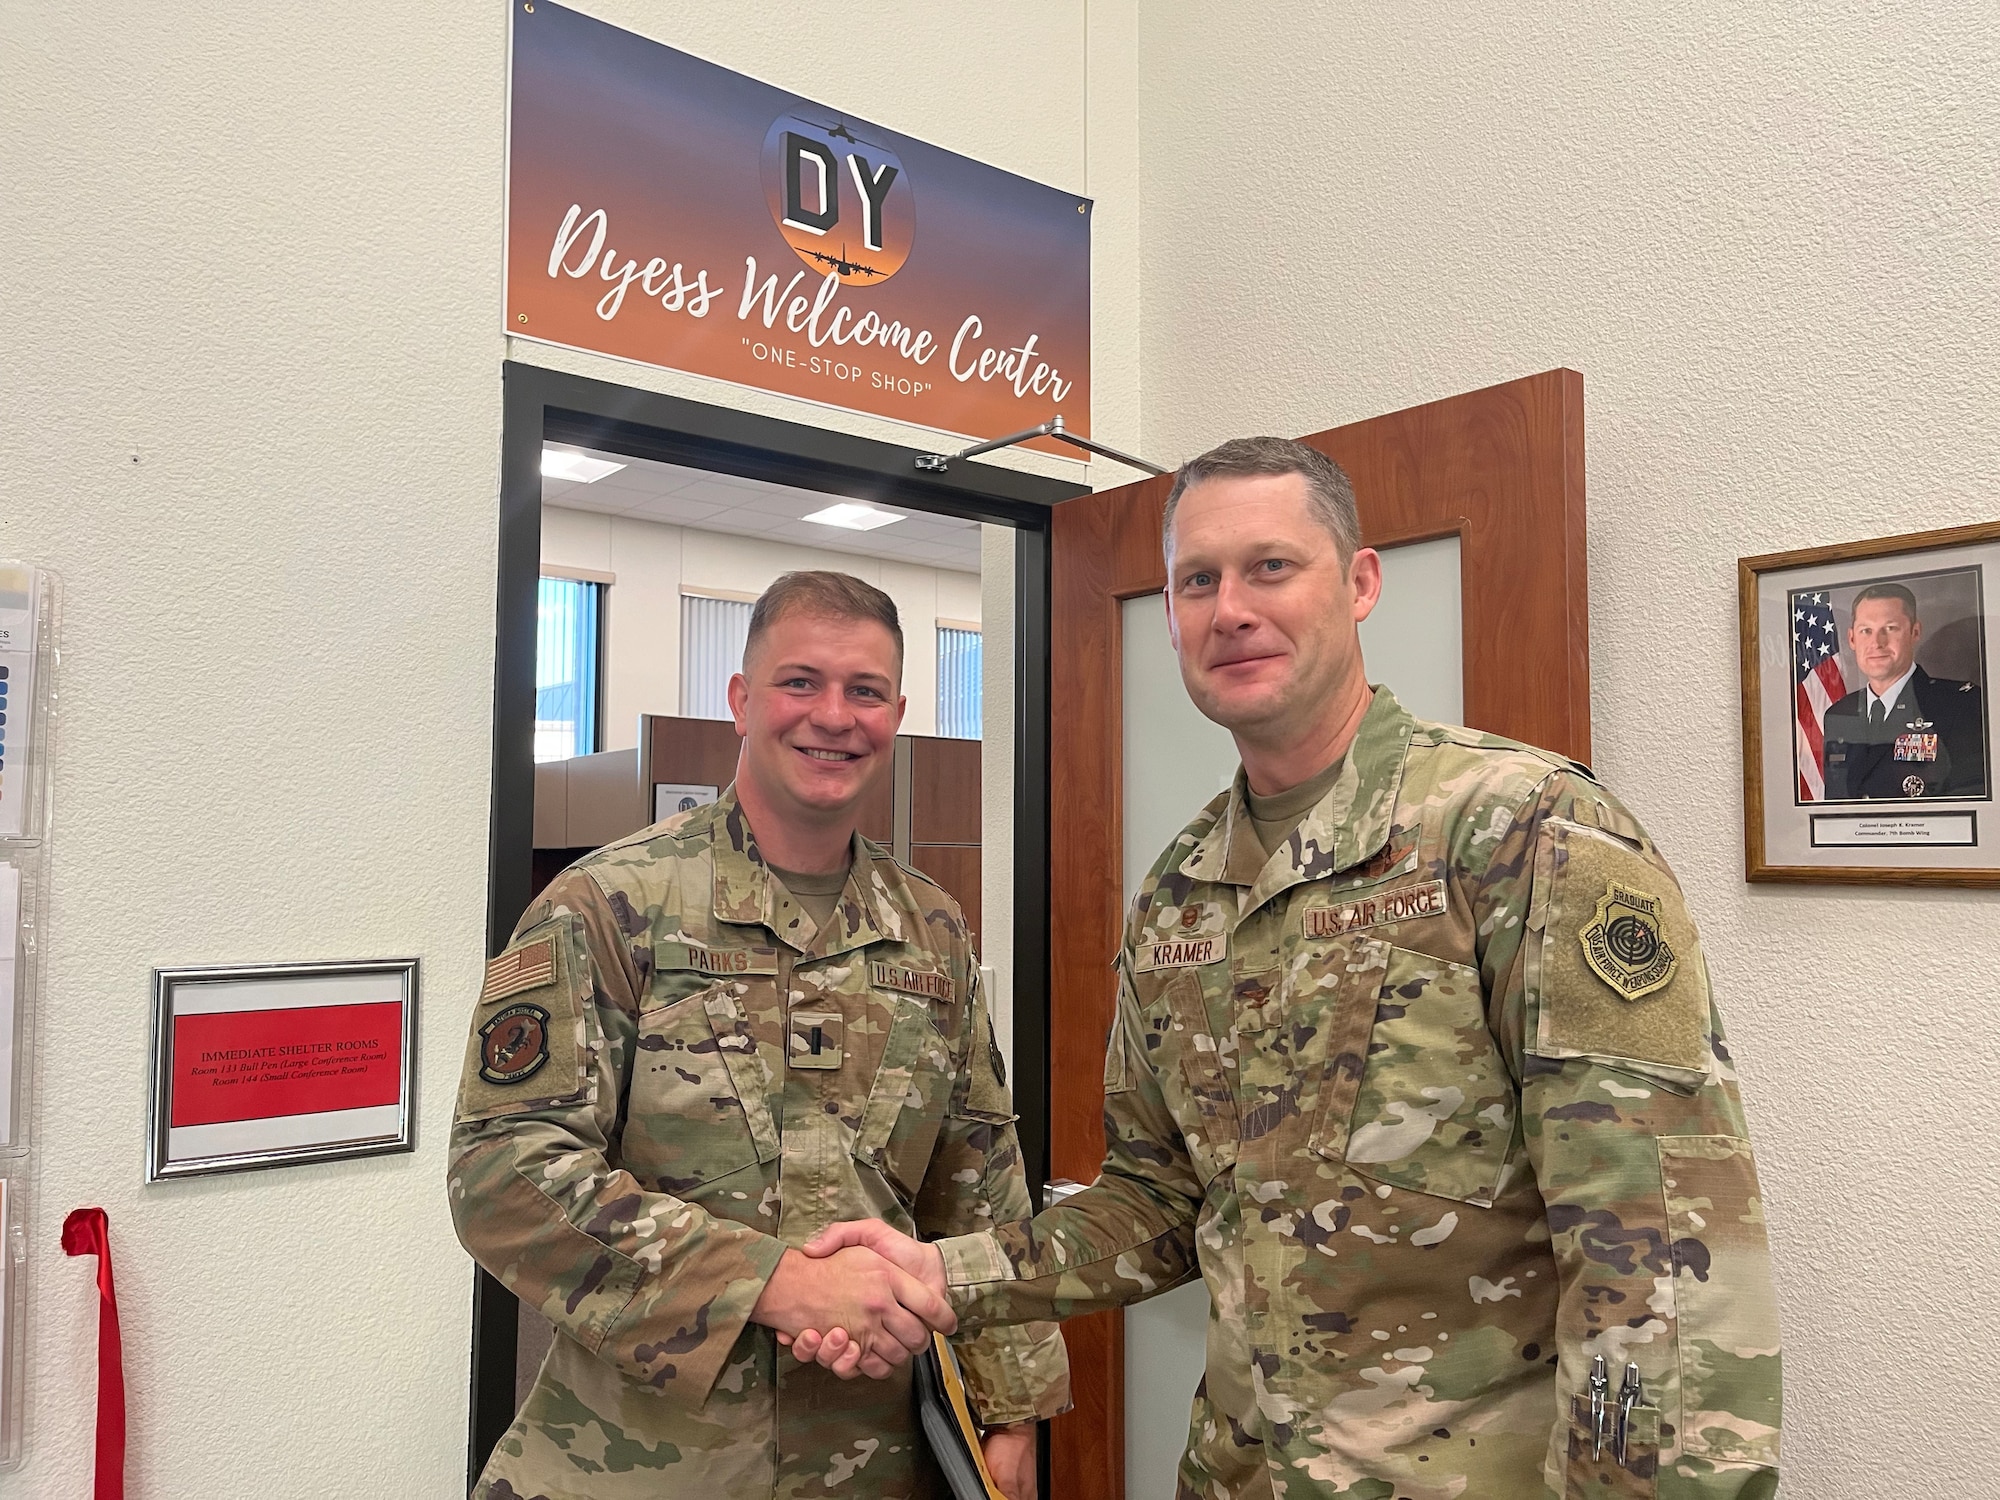 Col. Joseph Kramer, 7th Bomb Wing commander, right, shakes the hand of 1st Lt. Garrett Parks, 9th Aircraft Maintenance Unit officer in-charge, during the grand opening of the new Dyess Welcome Center at Dyess Air Force Base, Texas, Aug. 29, 2022. Parks was the first Airman to officially in-process at Dyess AFB using the new streamlined welcome center. (U.S. Air Force photo by Tech. Sgt. David Scott-Gaughan)